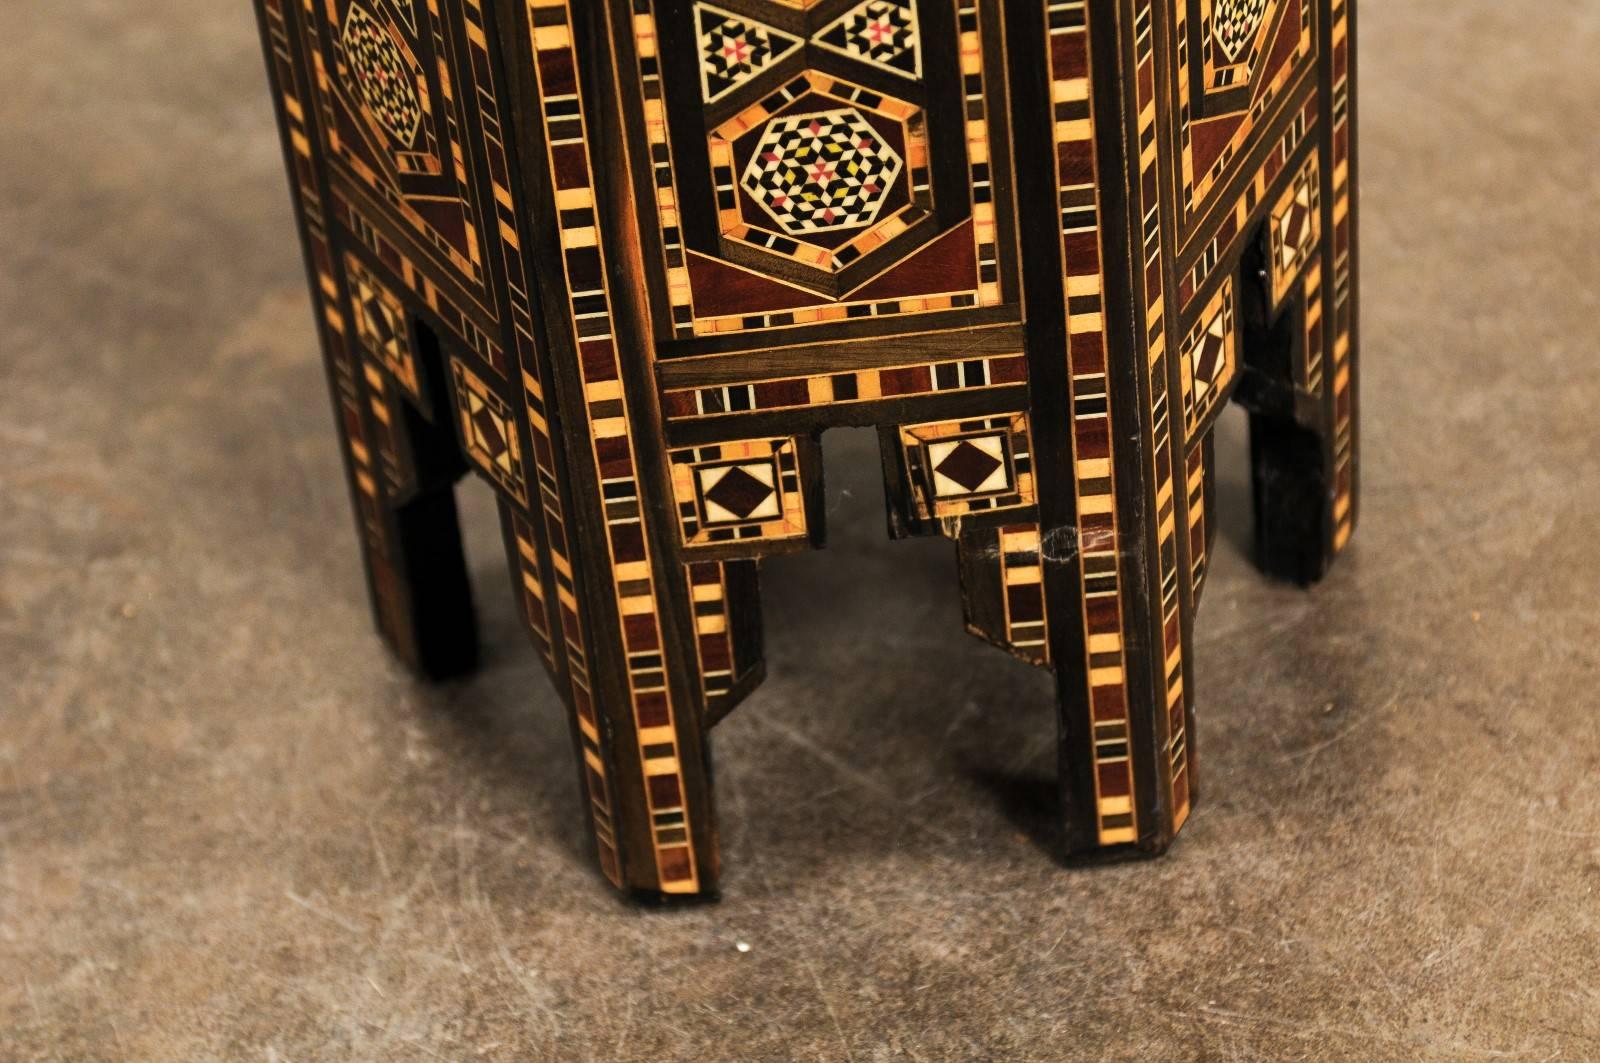 20th Century Petite Moroccan Drinks Table with Wood and Bone Inlay and Geometric Decor